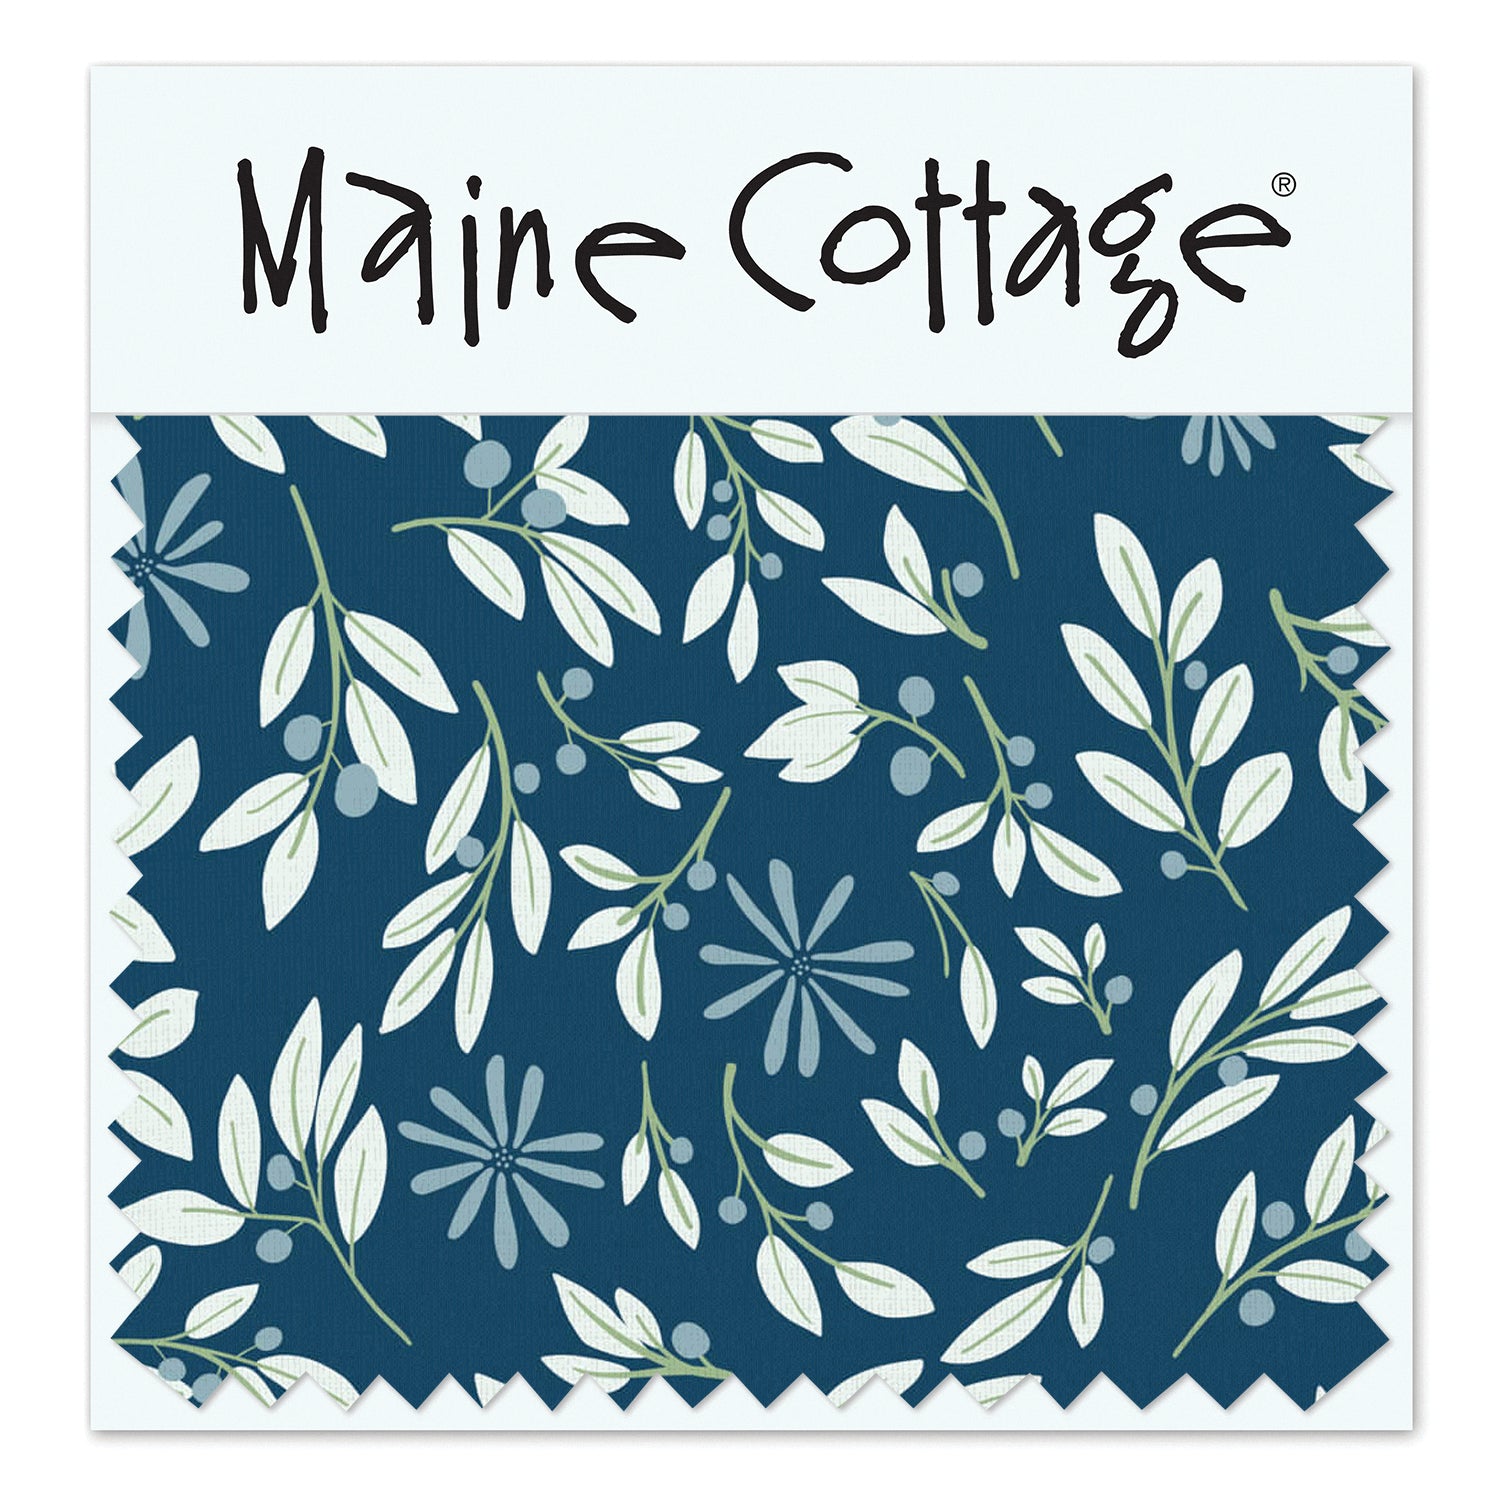 Maine Cottage Branch Out: Peacock Fabric Sample | Maine Cottage® 